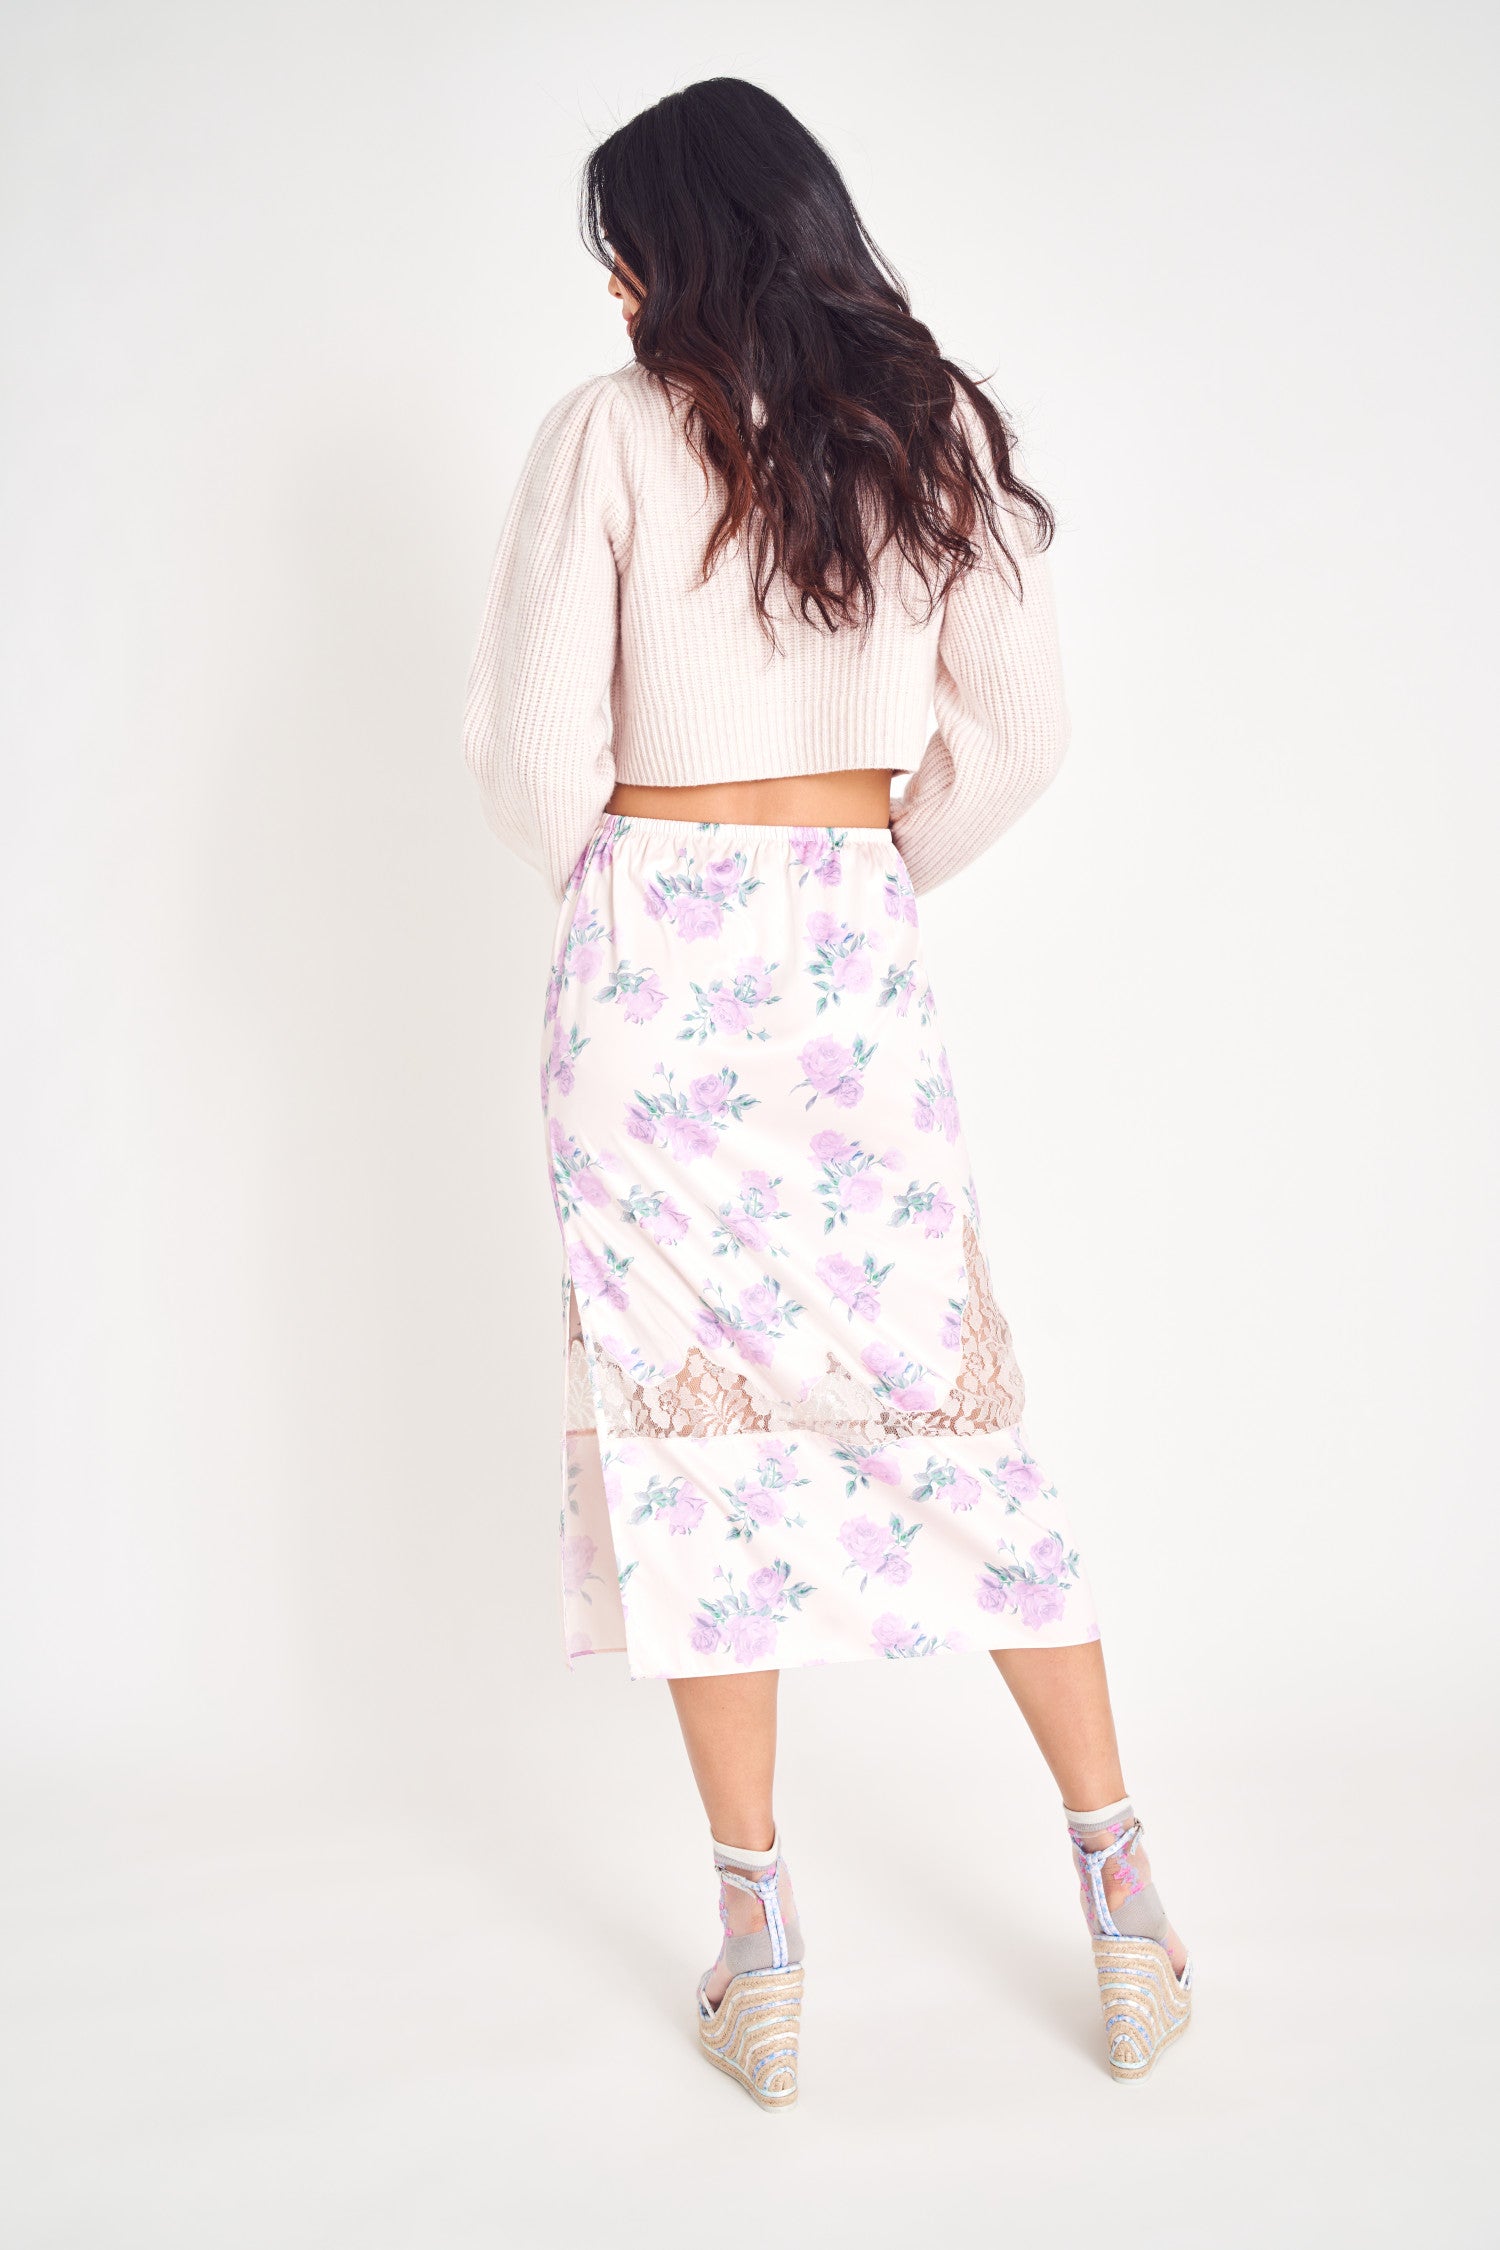 Purple floral midi skirt with lace insets.